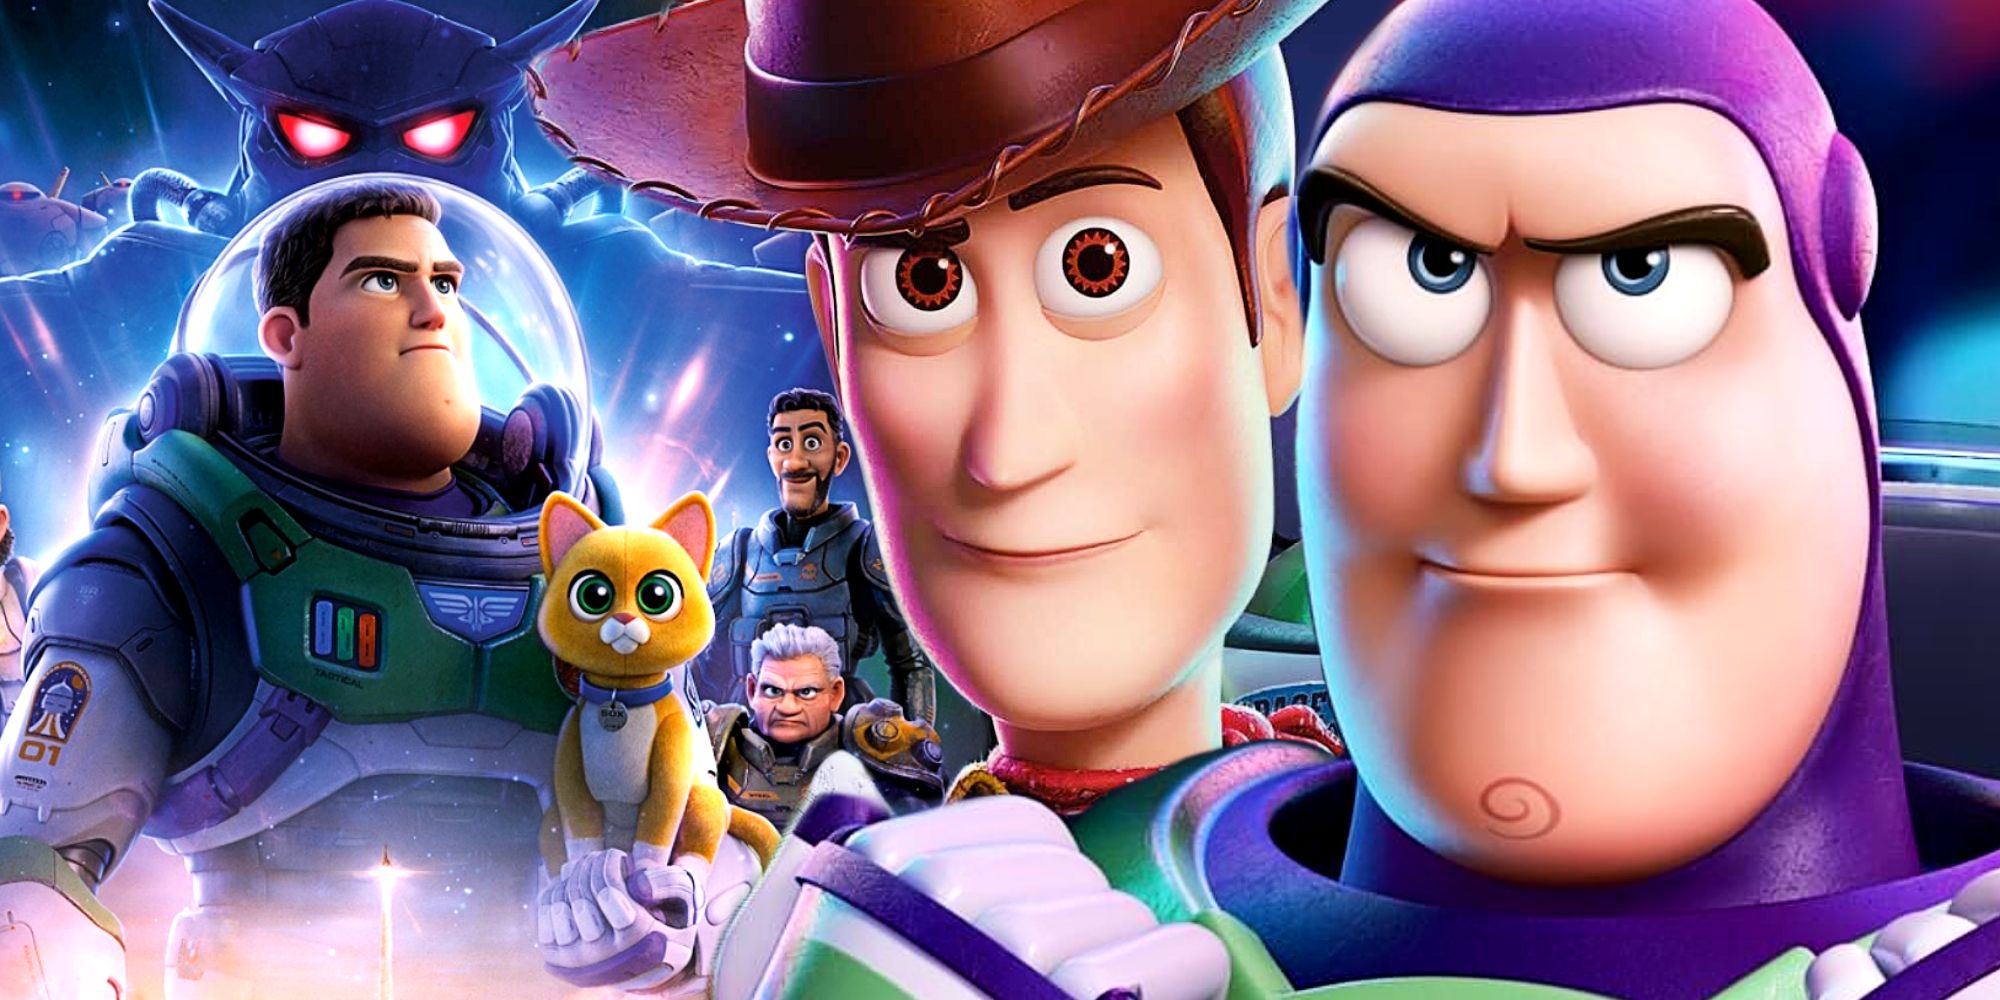 Can Lightyear 2 Still Happen After Toy Story 5?